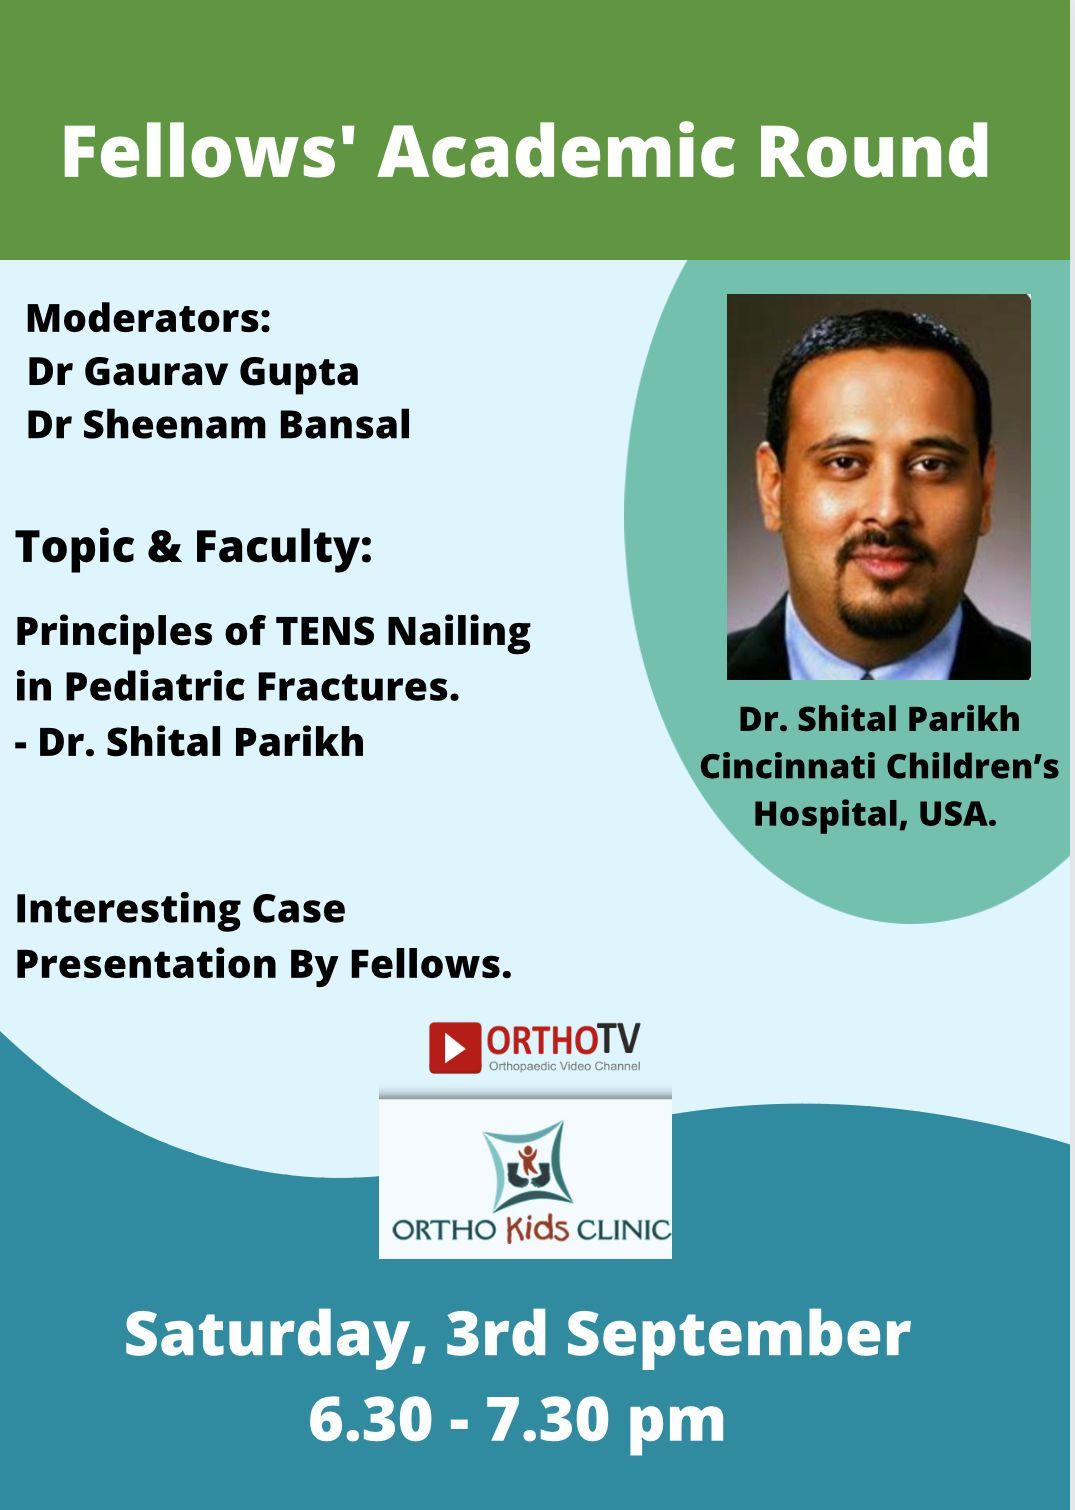 Fellows’ Academic Round by Orthokids - Principles of TENS Nailing in Pediatric Fractures - Dr Shital Parikh